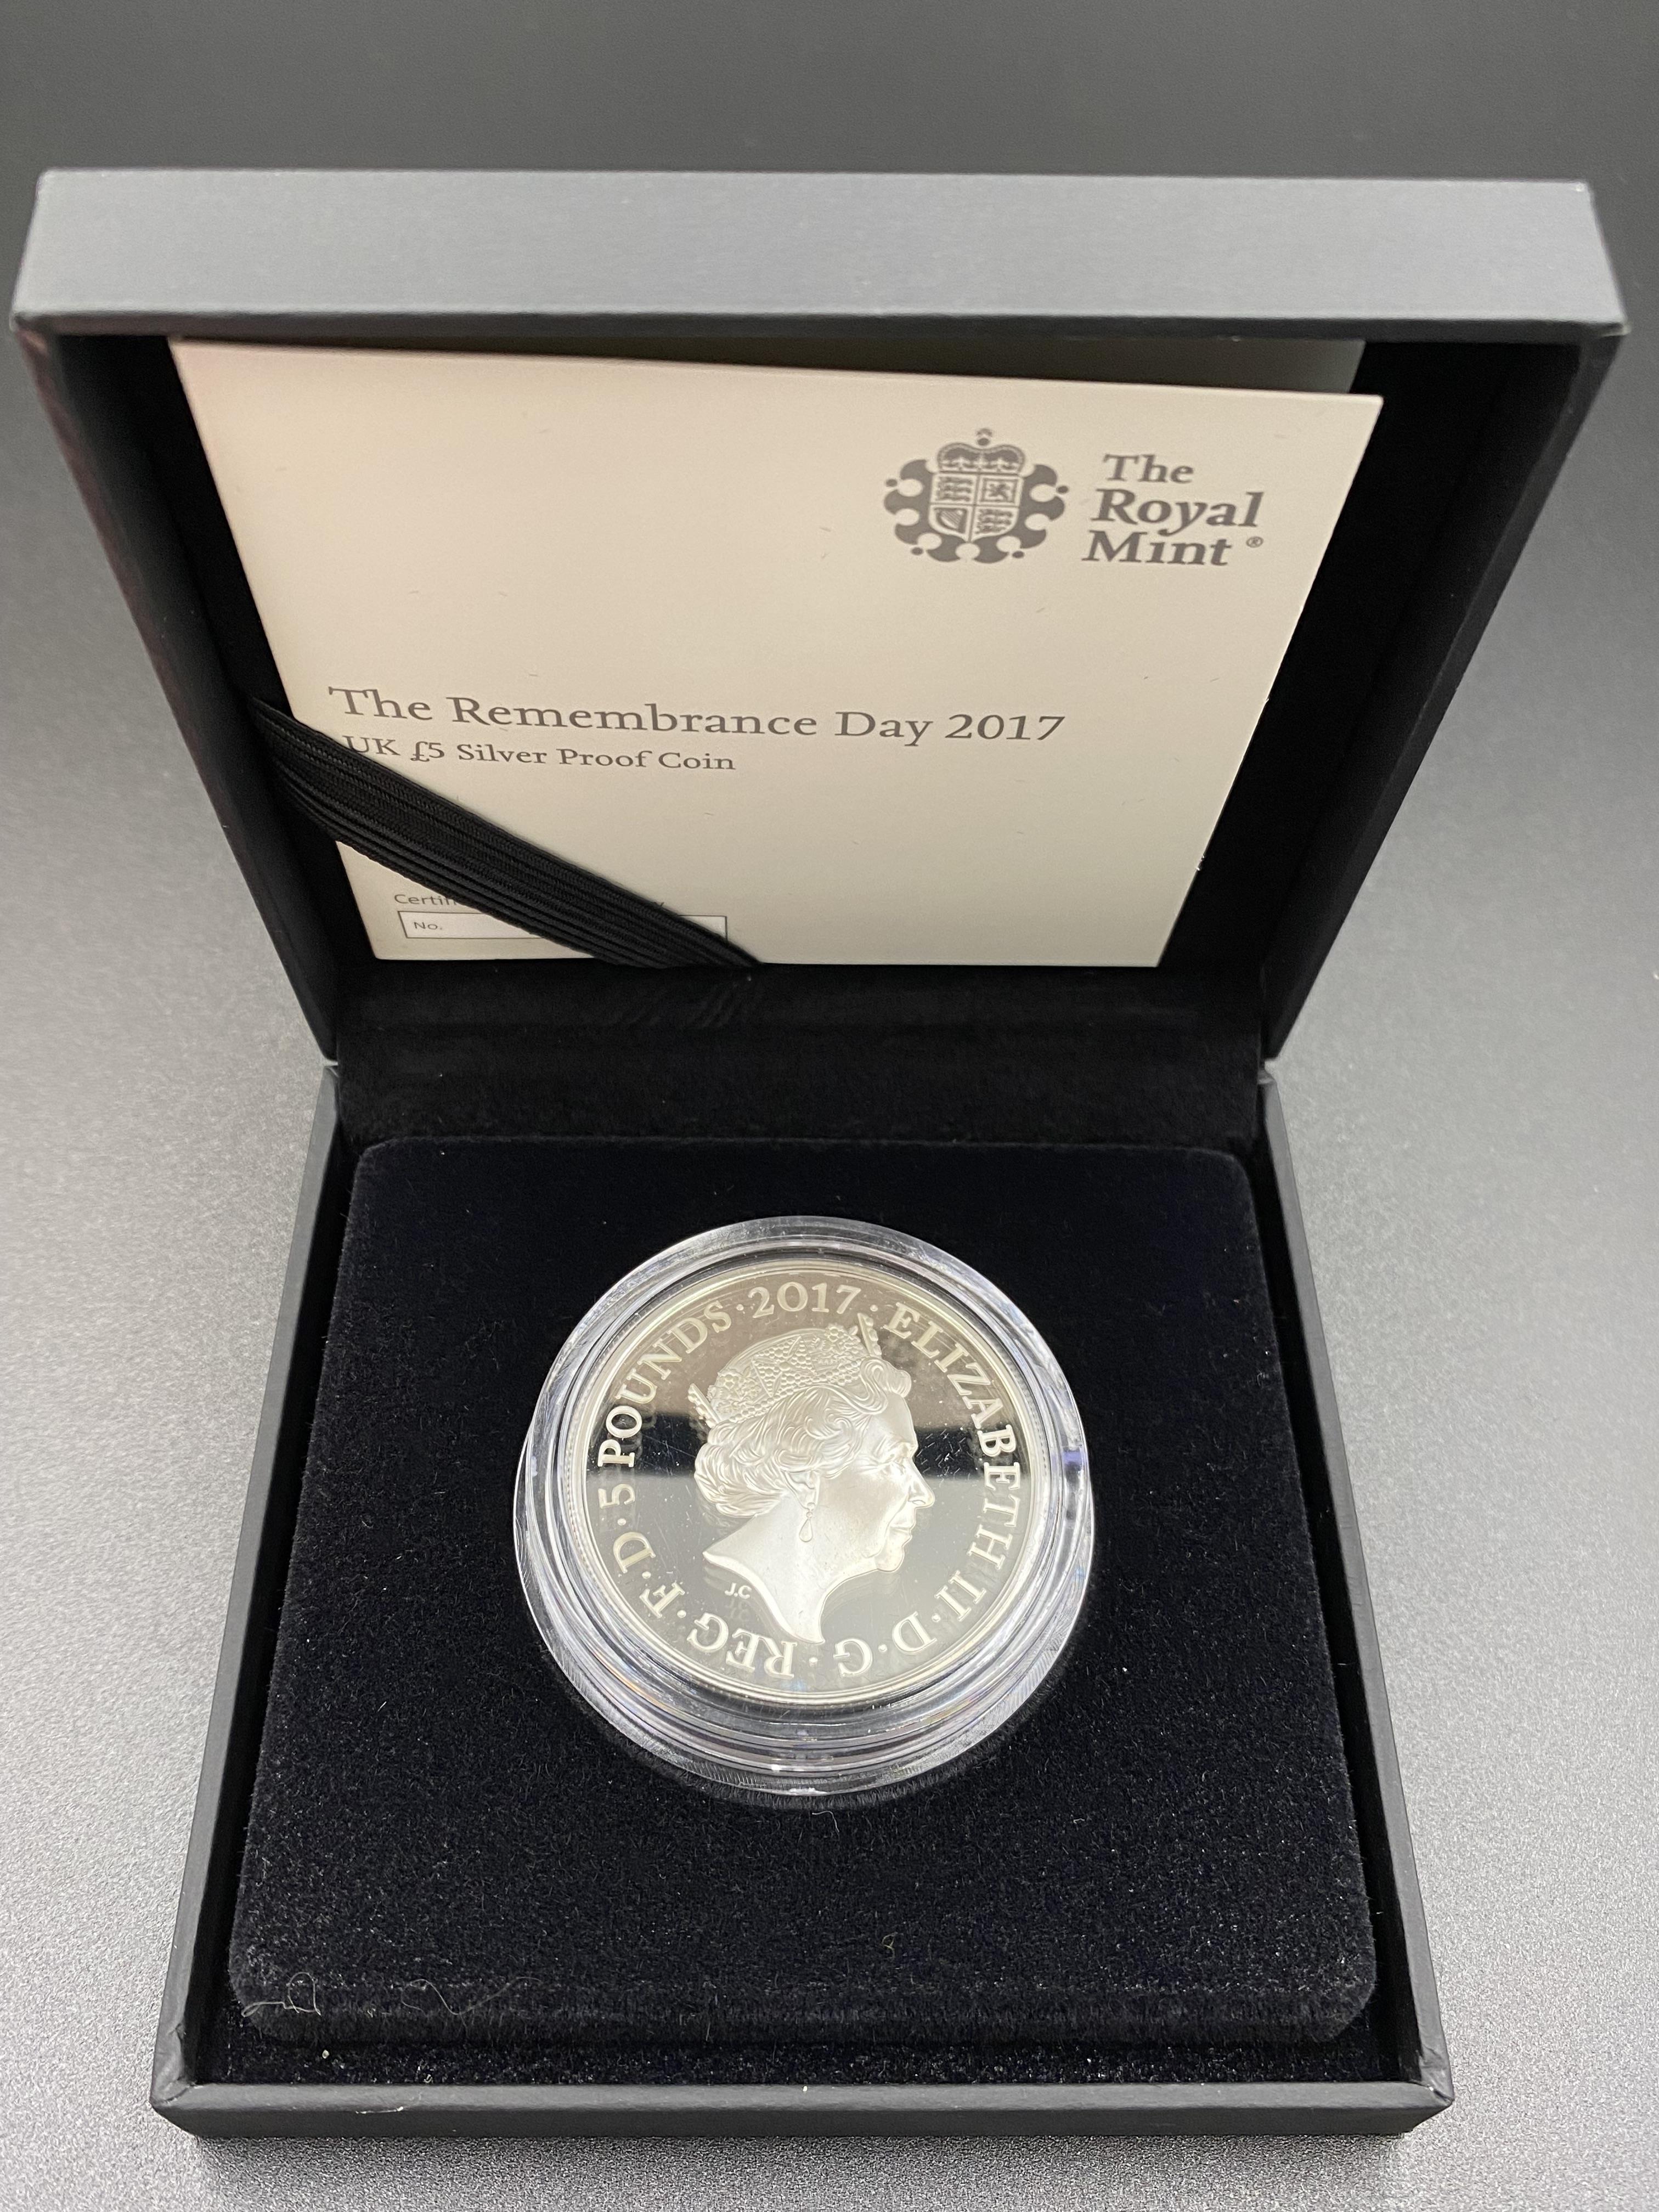 Royal Mint Remembrance Day 2017 £5 silver proof coin - Image 5 of 5